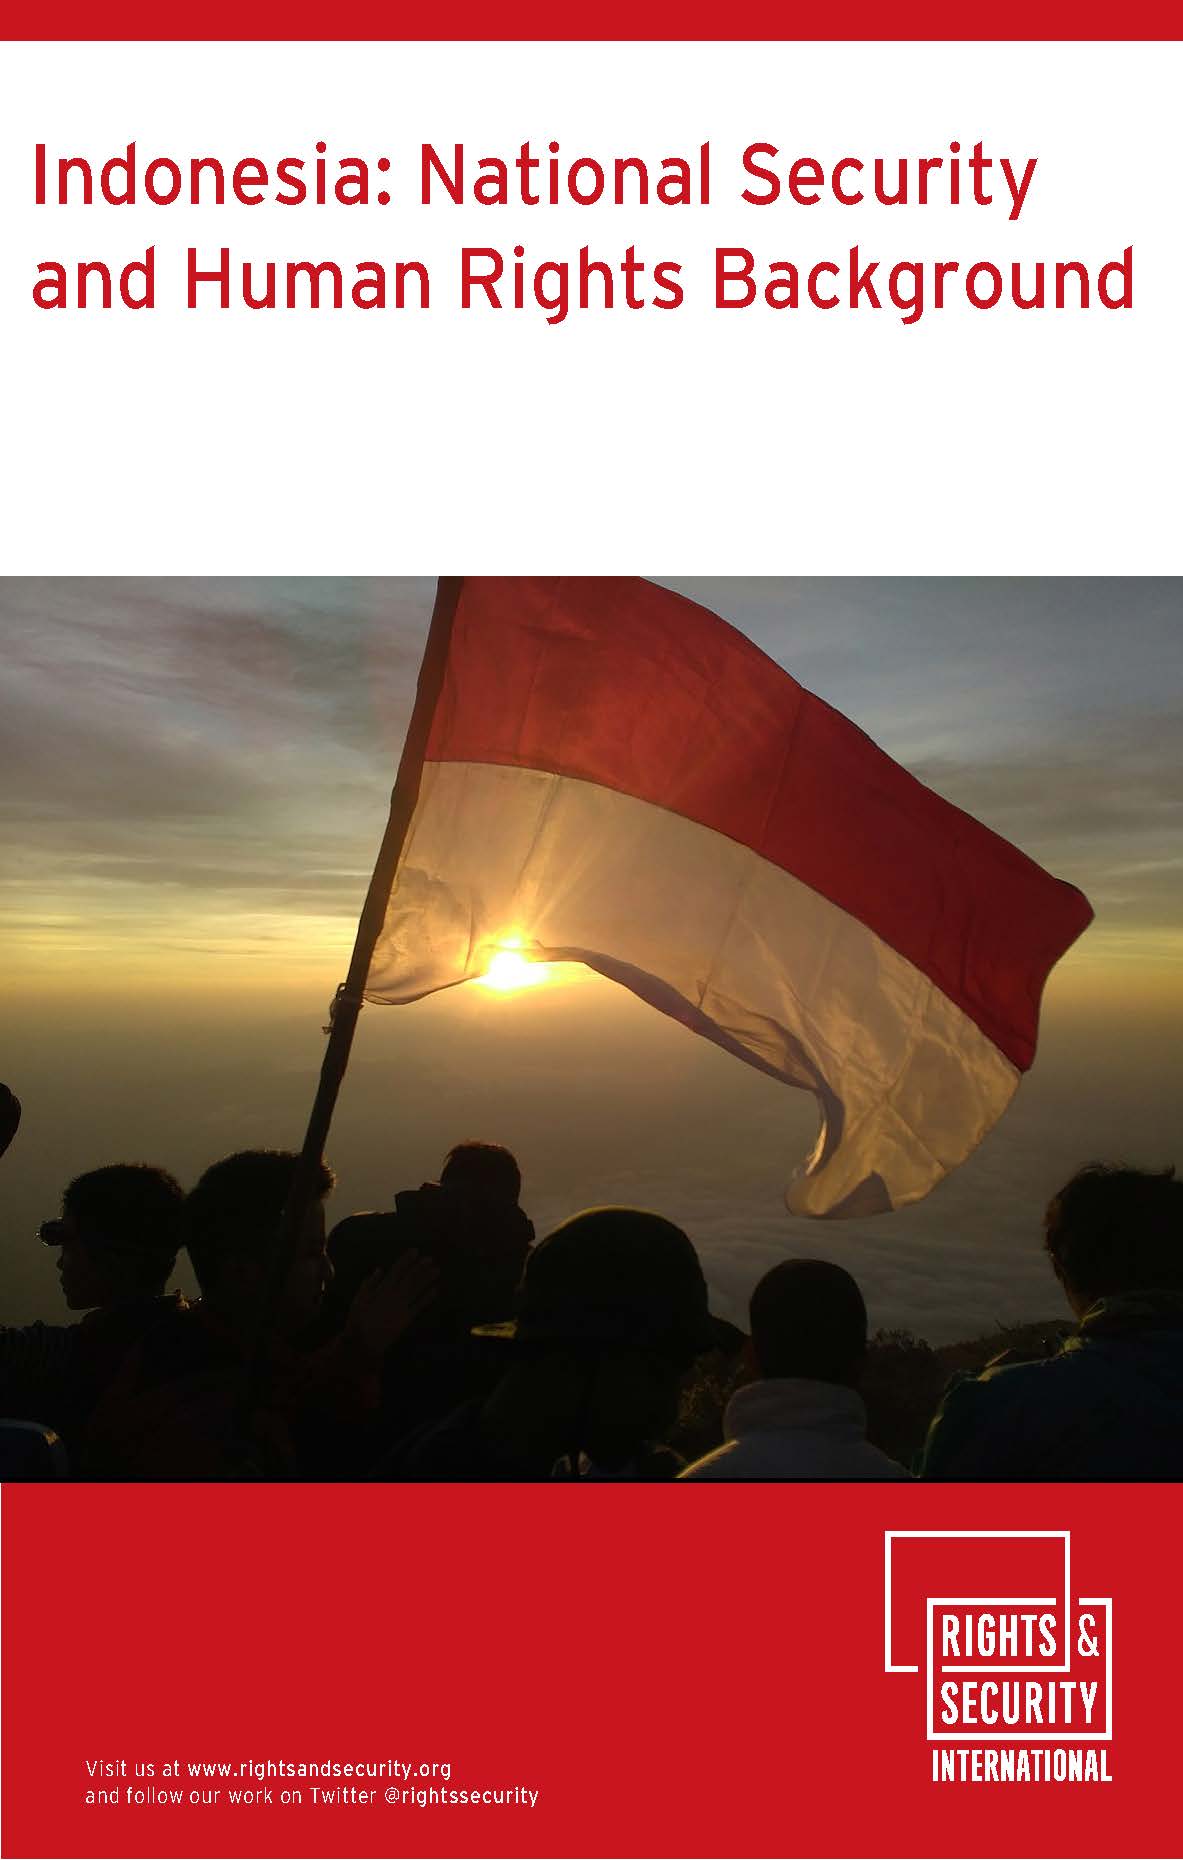 Indonesia: National Security and Human Rights Background